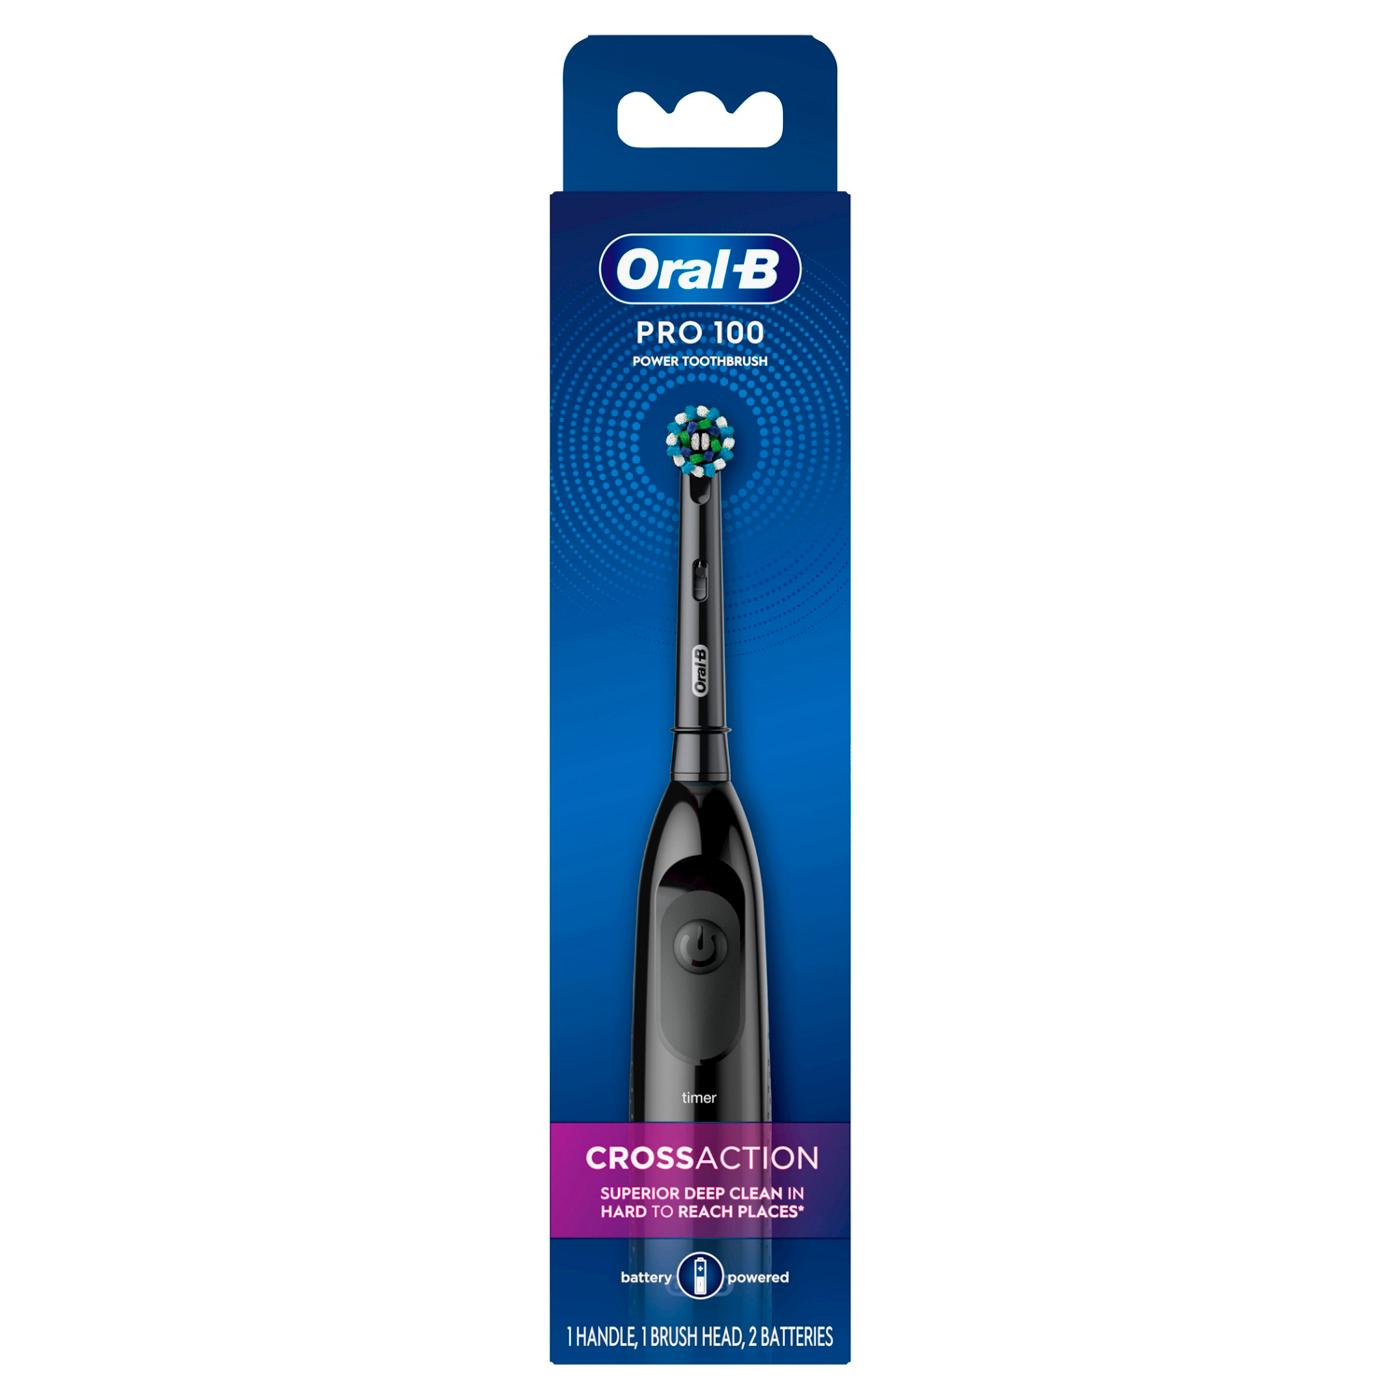 Oral-B Pro 100 Cross Action Powered Toothbrush - Black; image 1 of 2